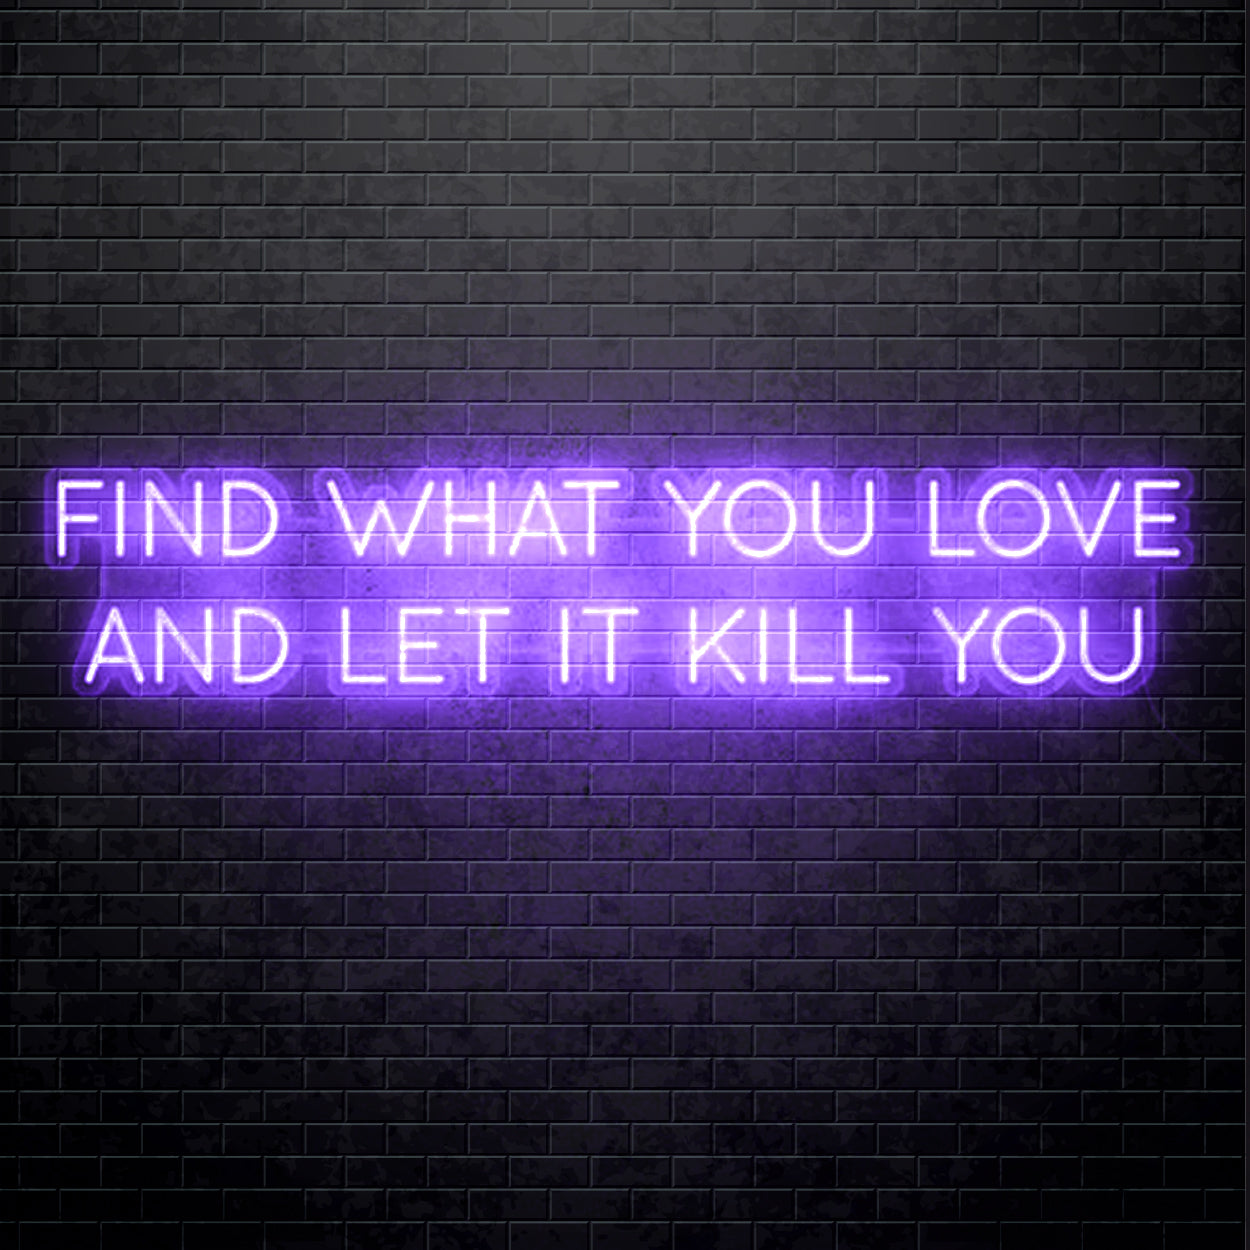 LED Neon sign - Find what you love, and let it kill you